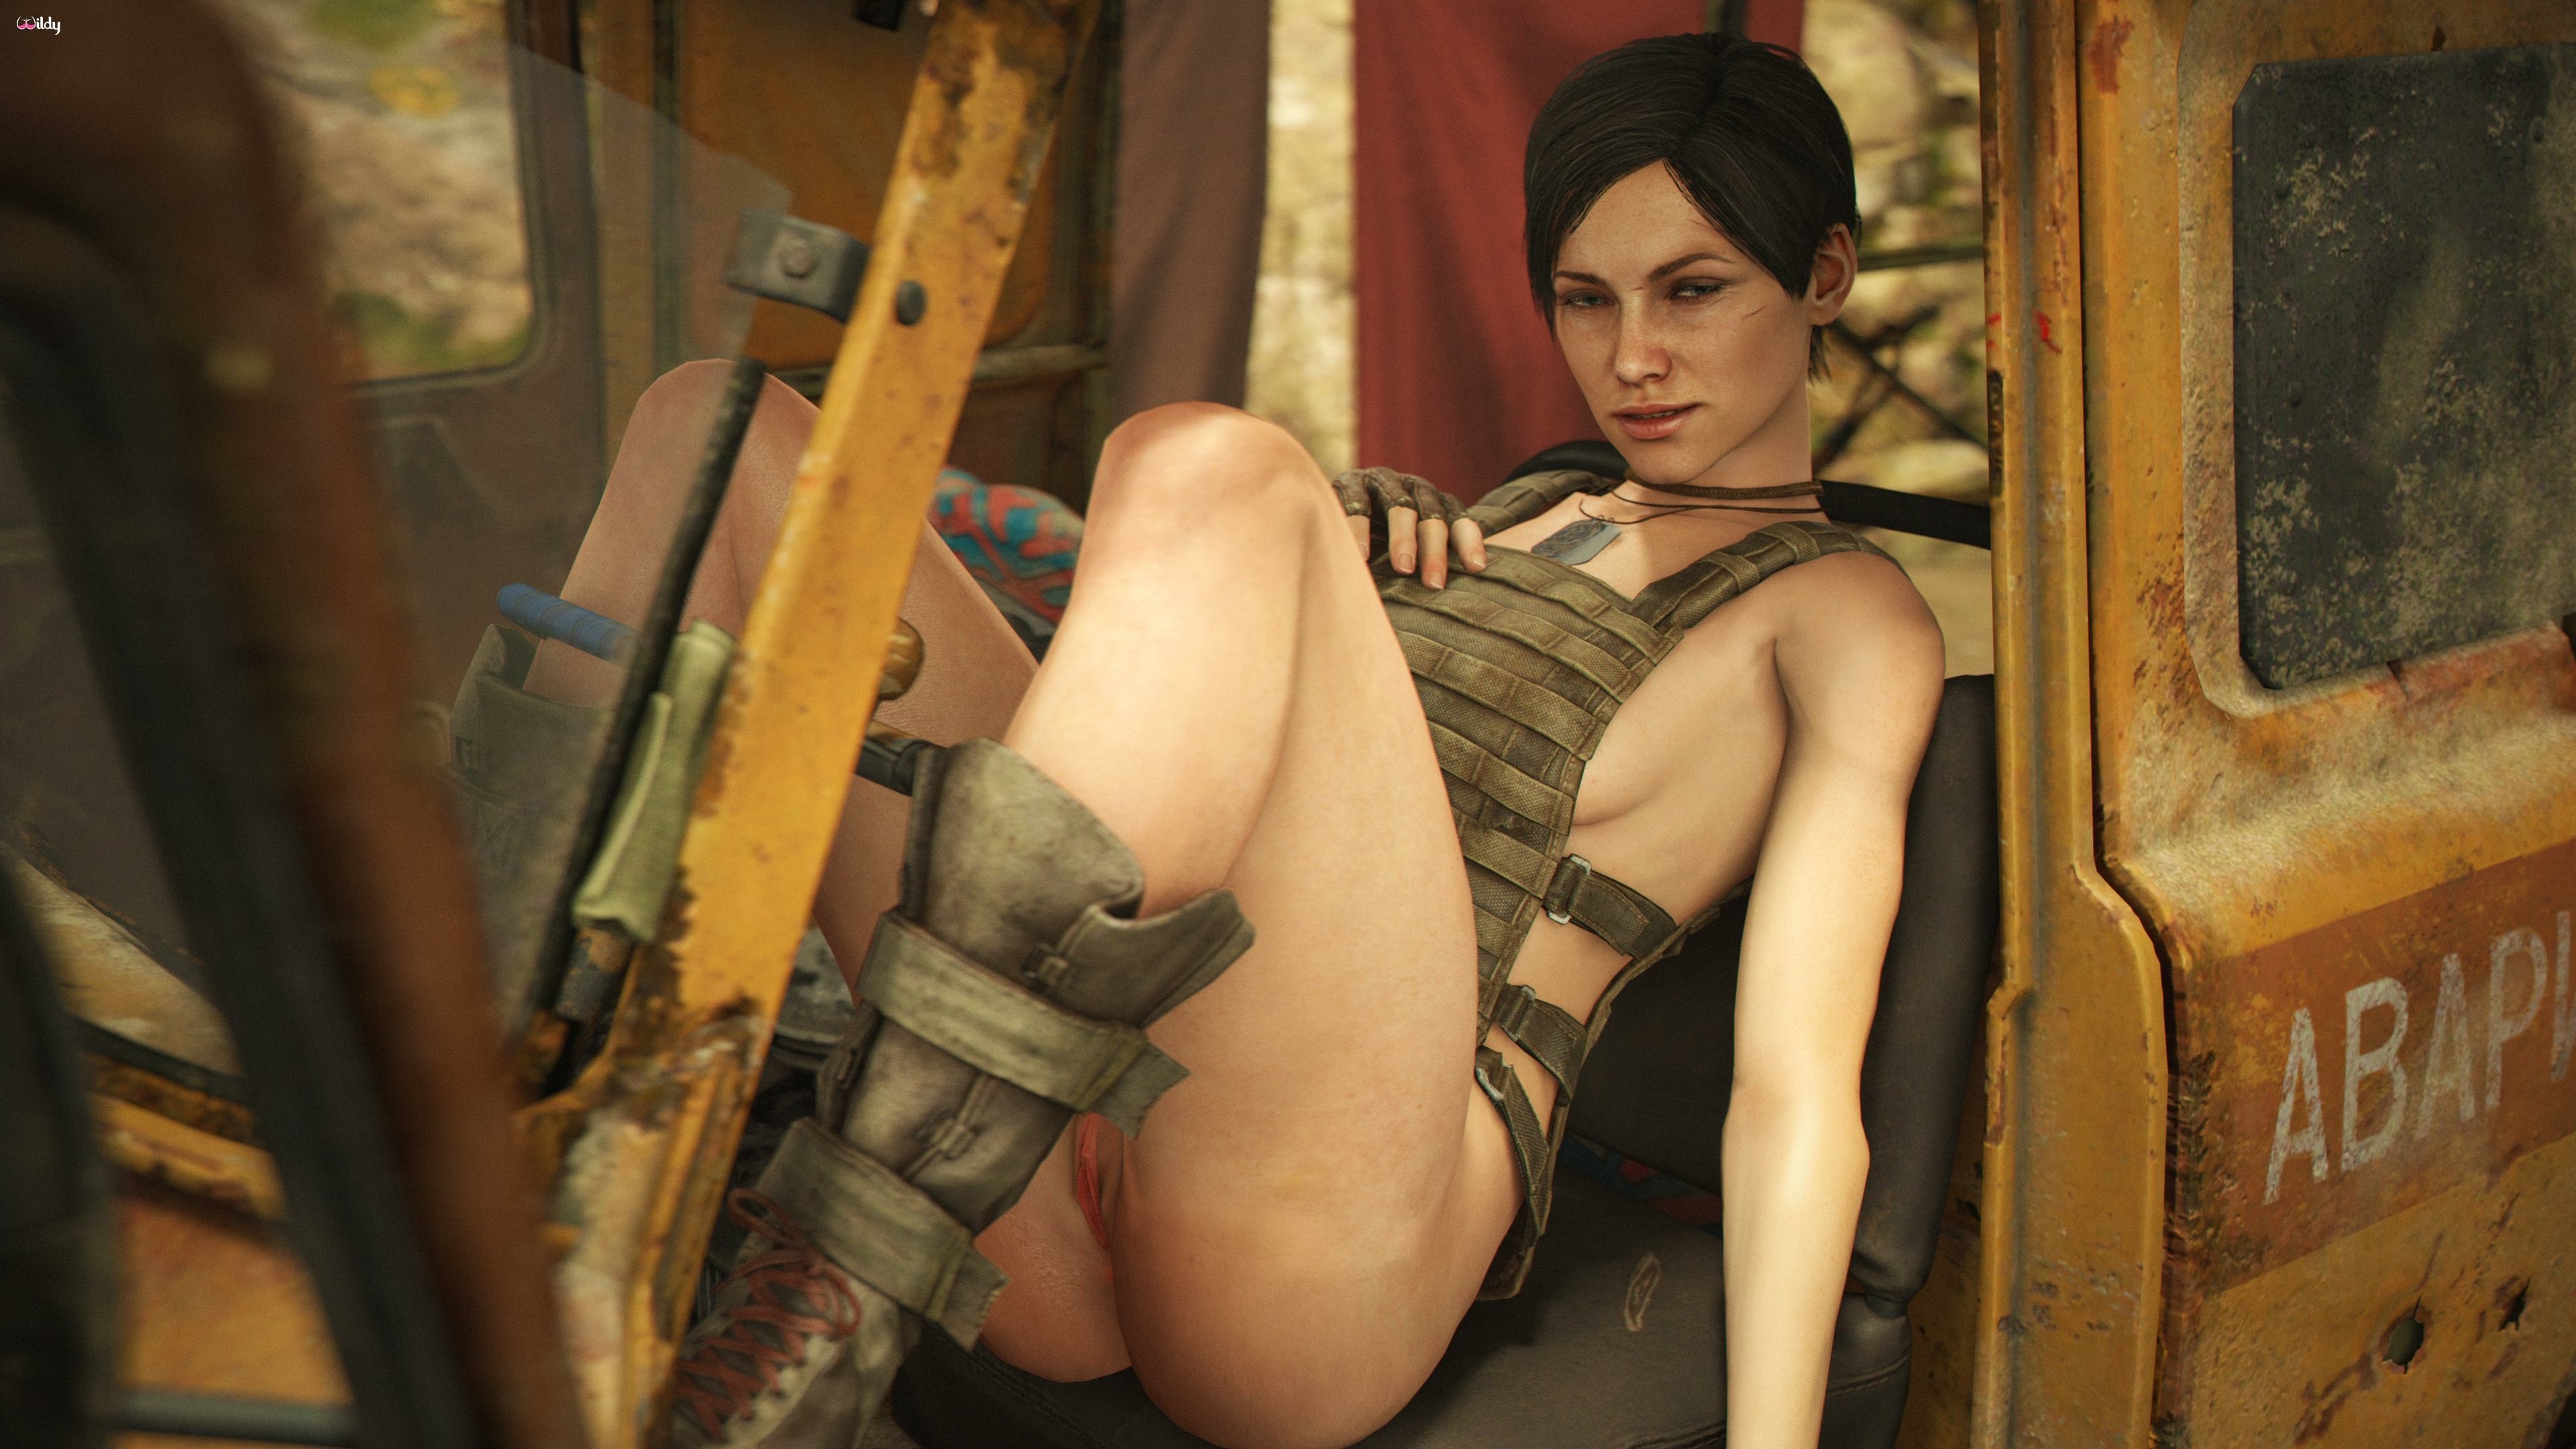  Anya chilling and waiting. 💦 Anna Miller Metro Exodus Pussy Sexy Lingerie Boobs Big boobs Tits Naked Cake Ass Sexy Horny Face Horny 3d Porn